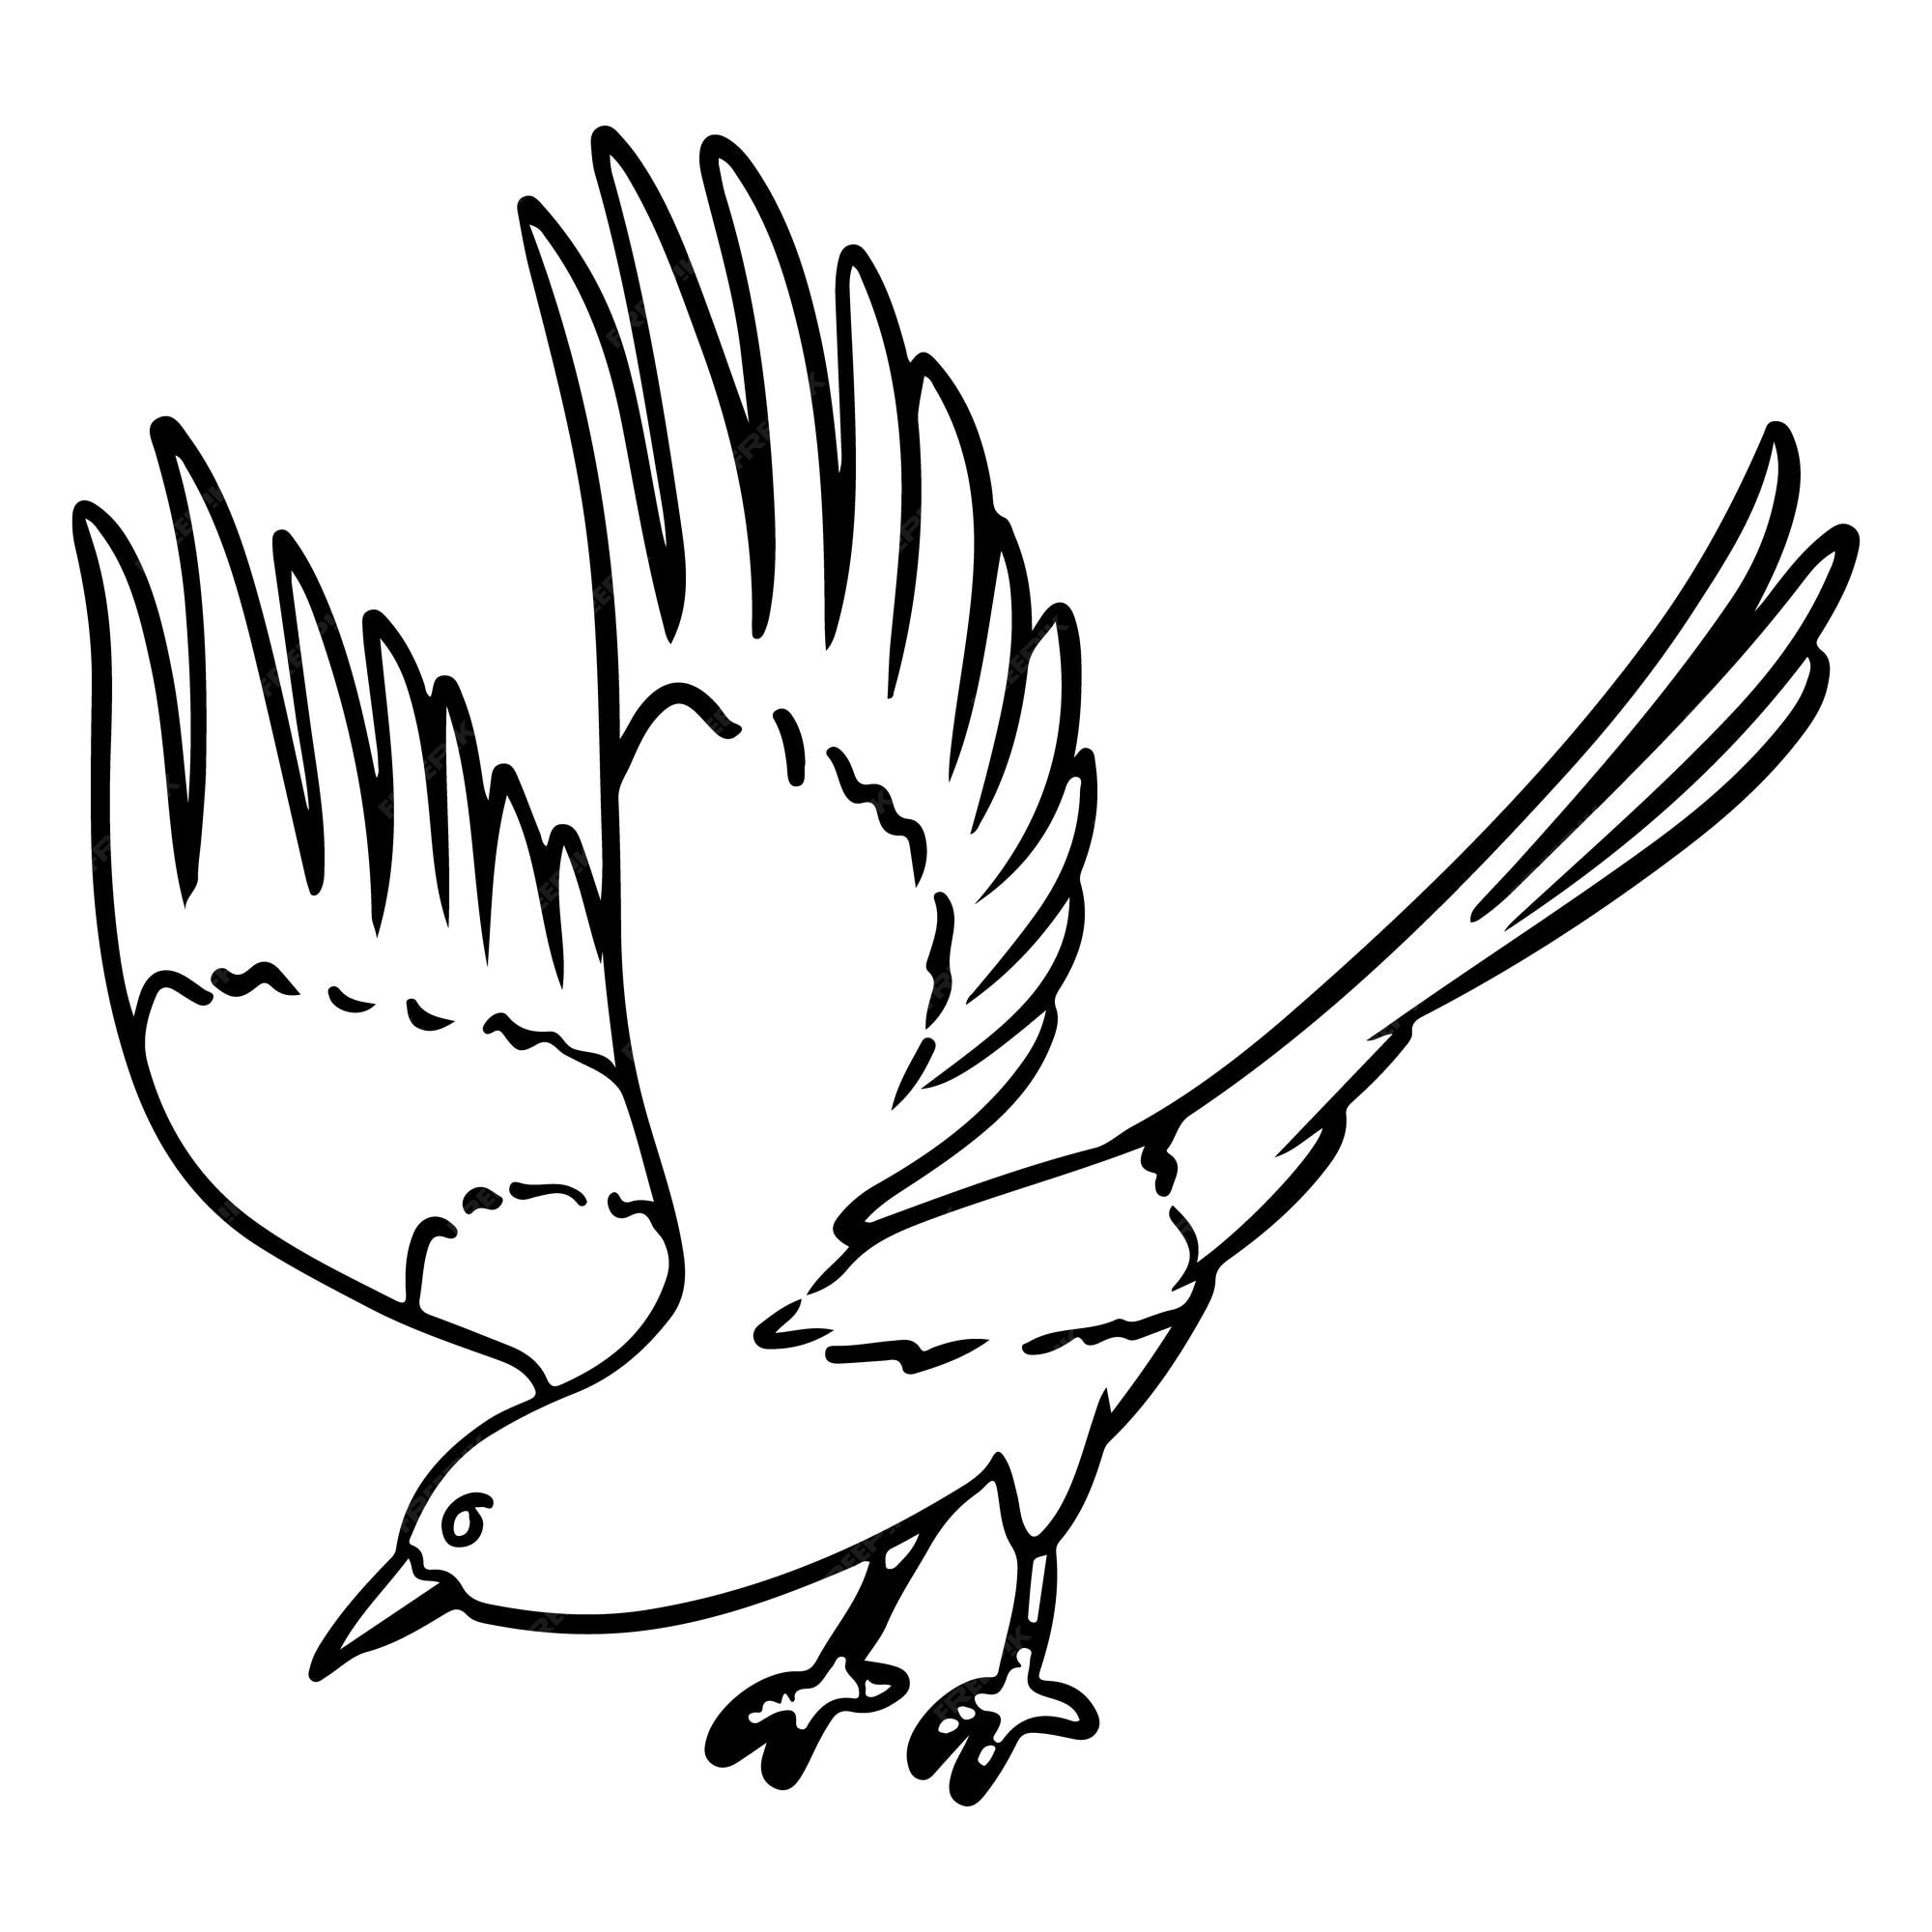 Premium Vector | Magpie cartoon icon wild flying bird outline comic style  image hand drawn isolated lineart image for prints designs cards web and  mobile clipart